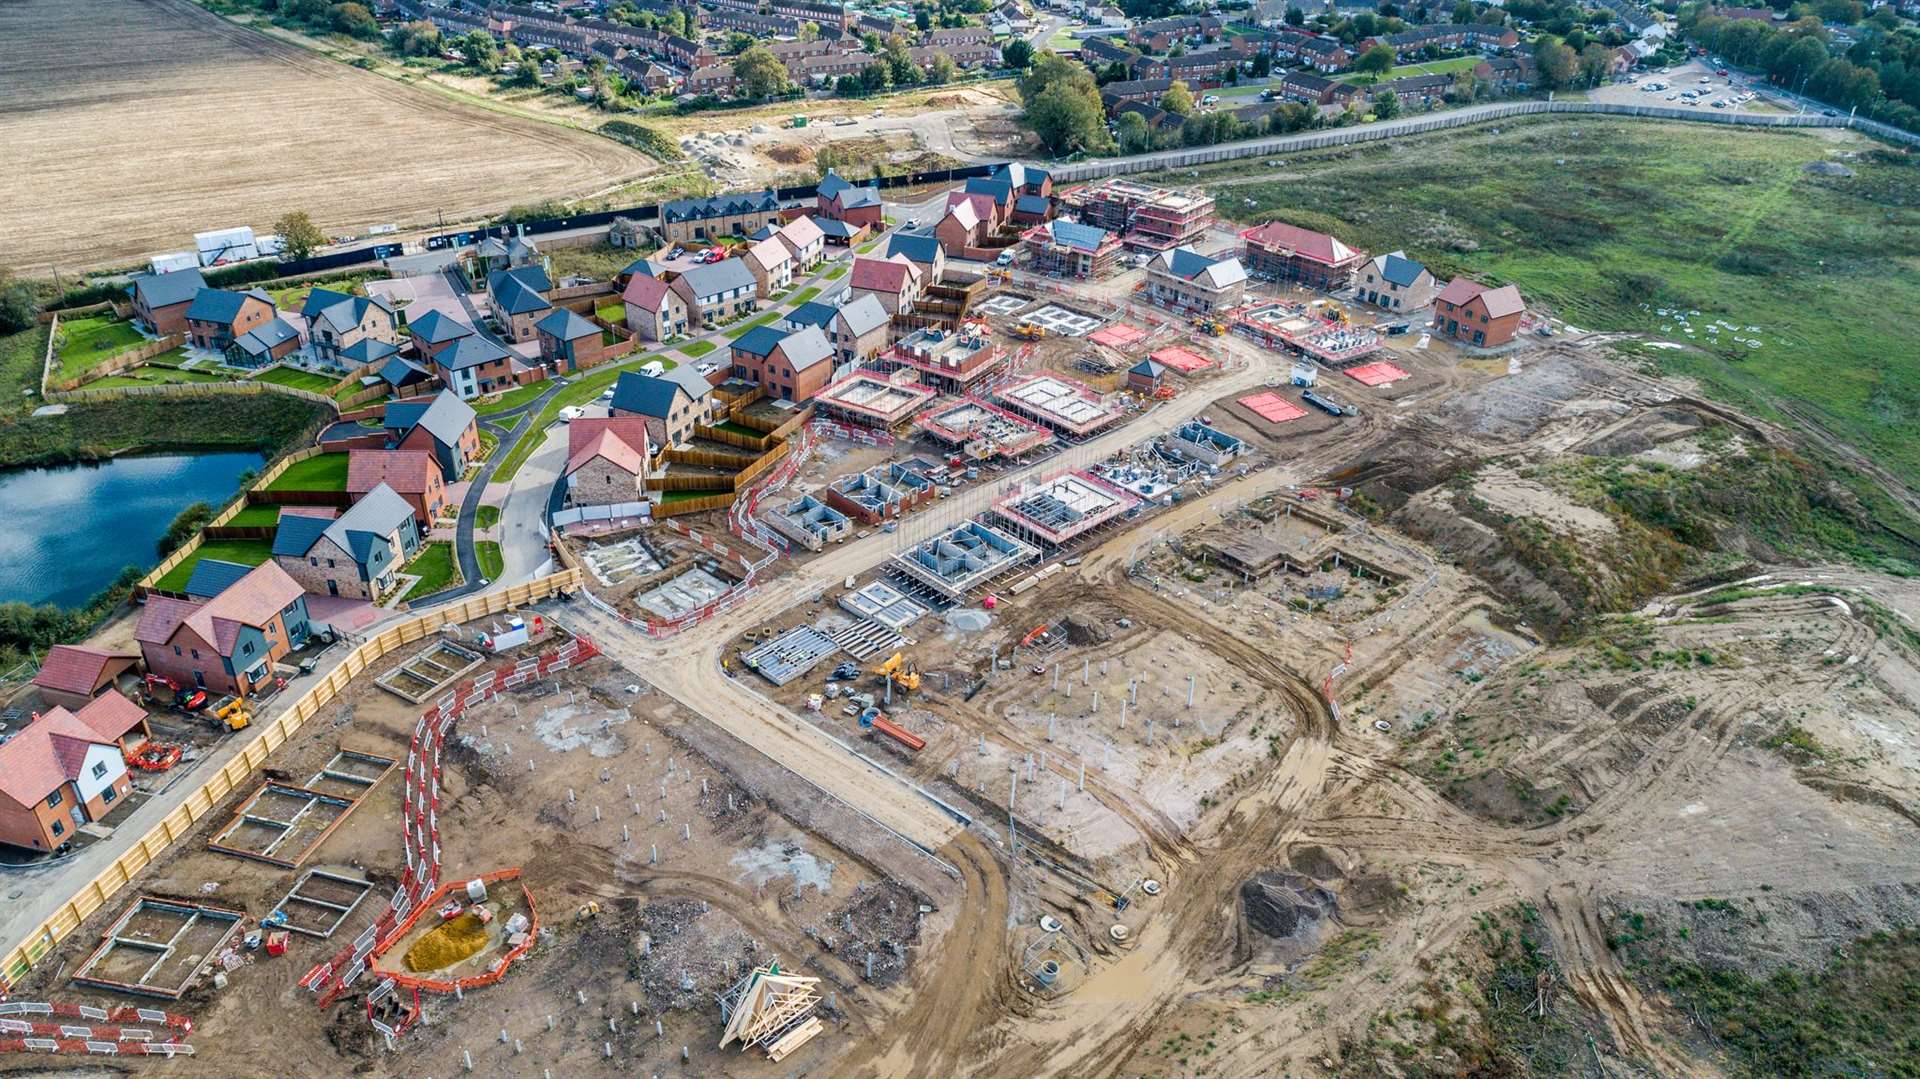 The 330-home scheme at Oare Gravel Works is progressing